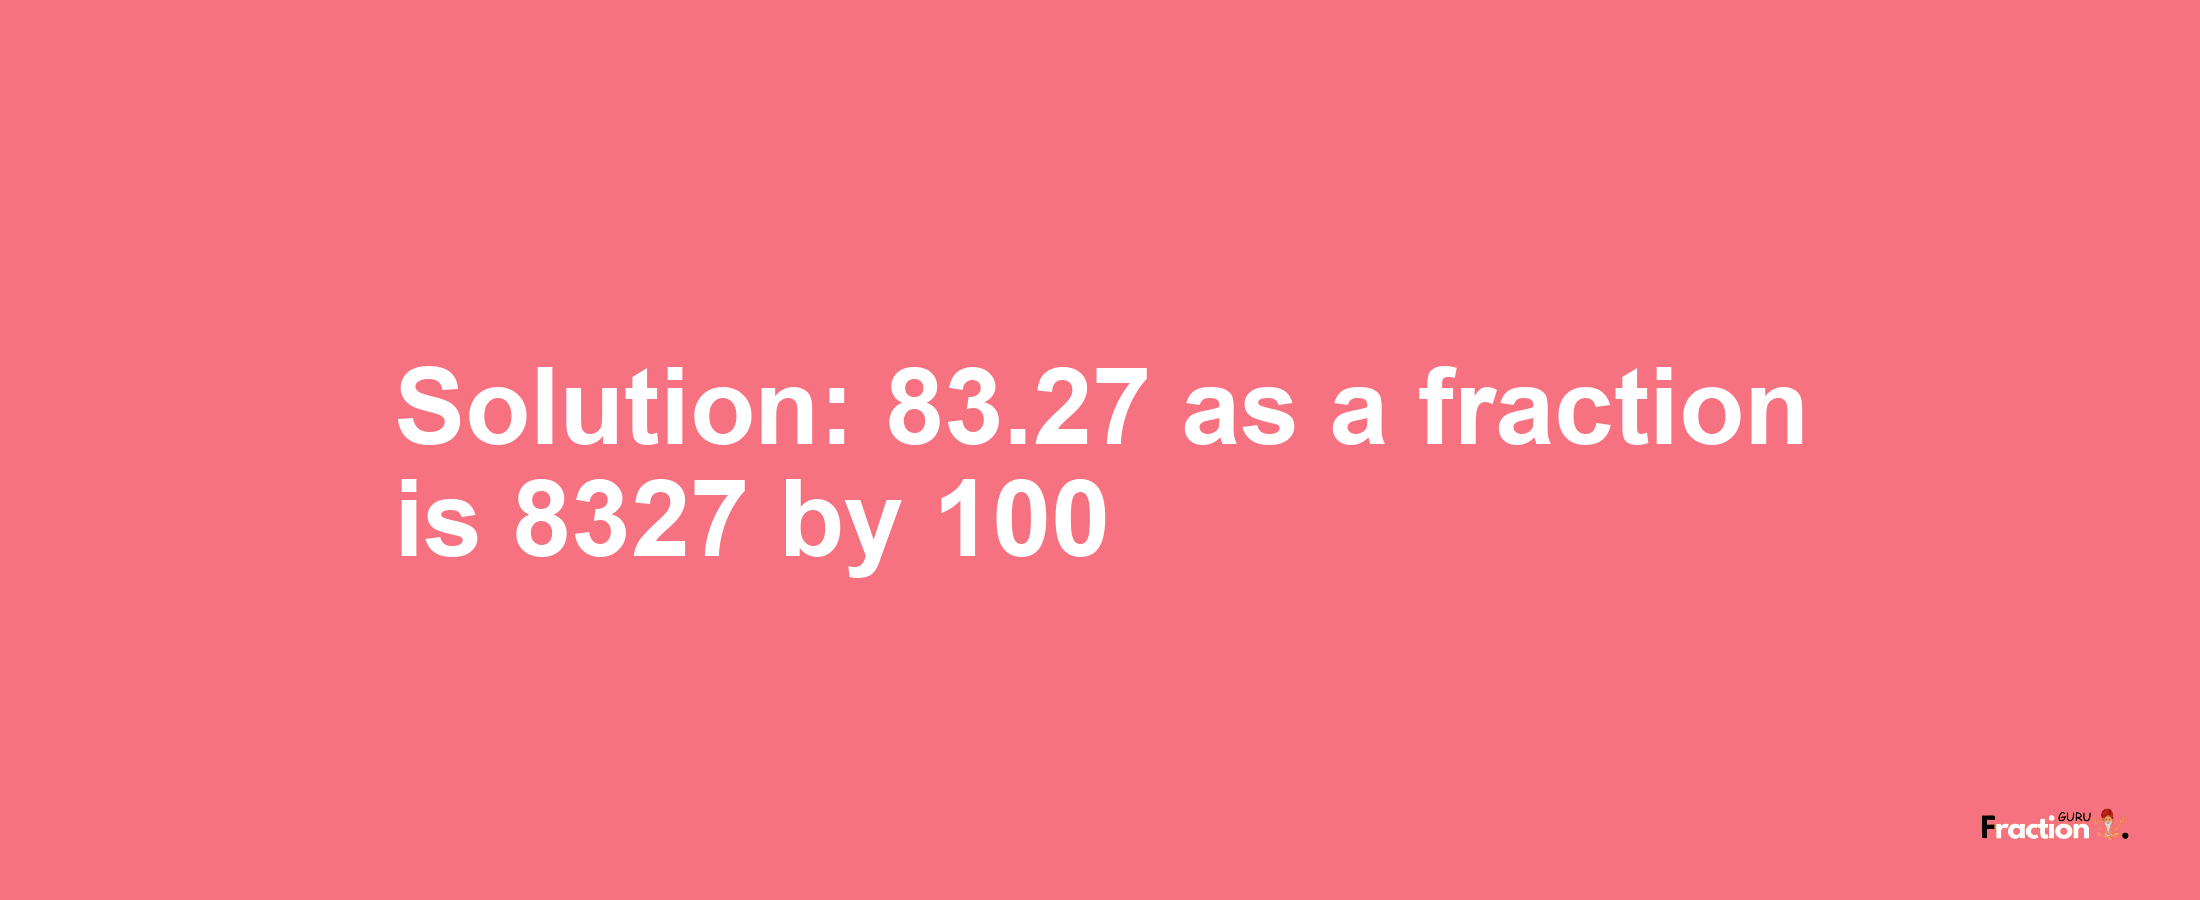 Solution:83.27 as a fraction is 8327/100